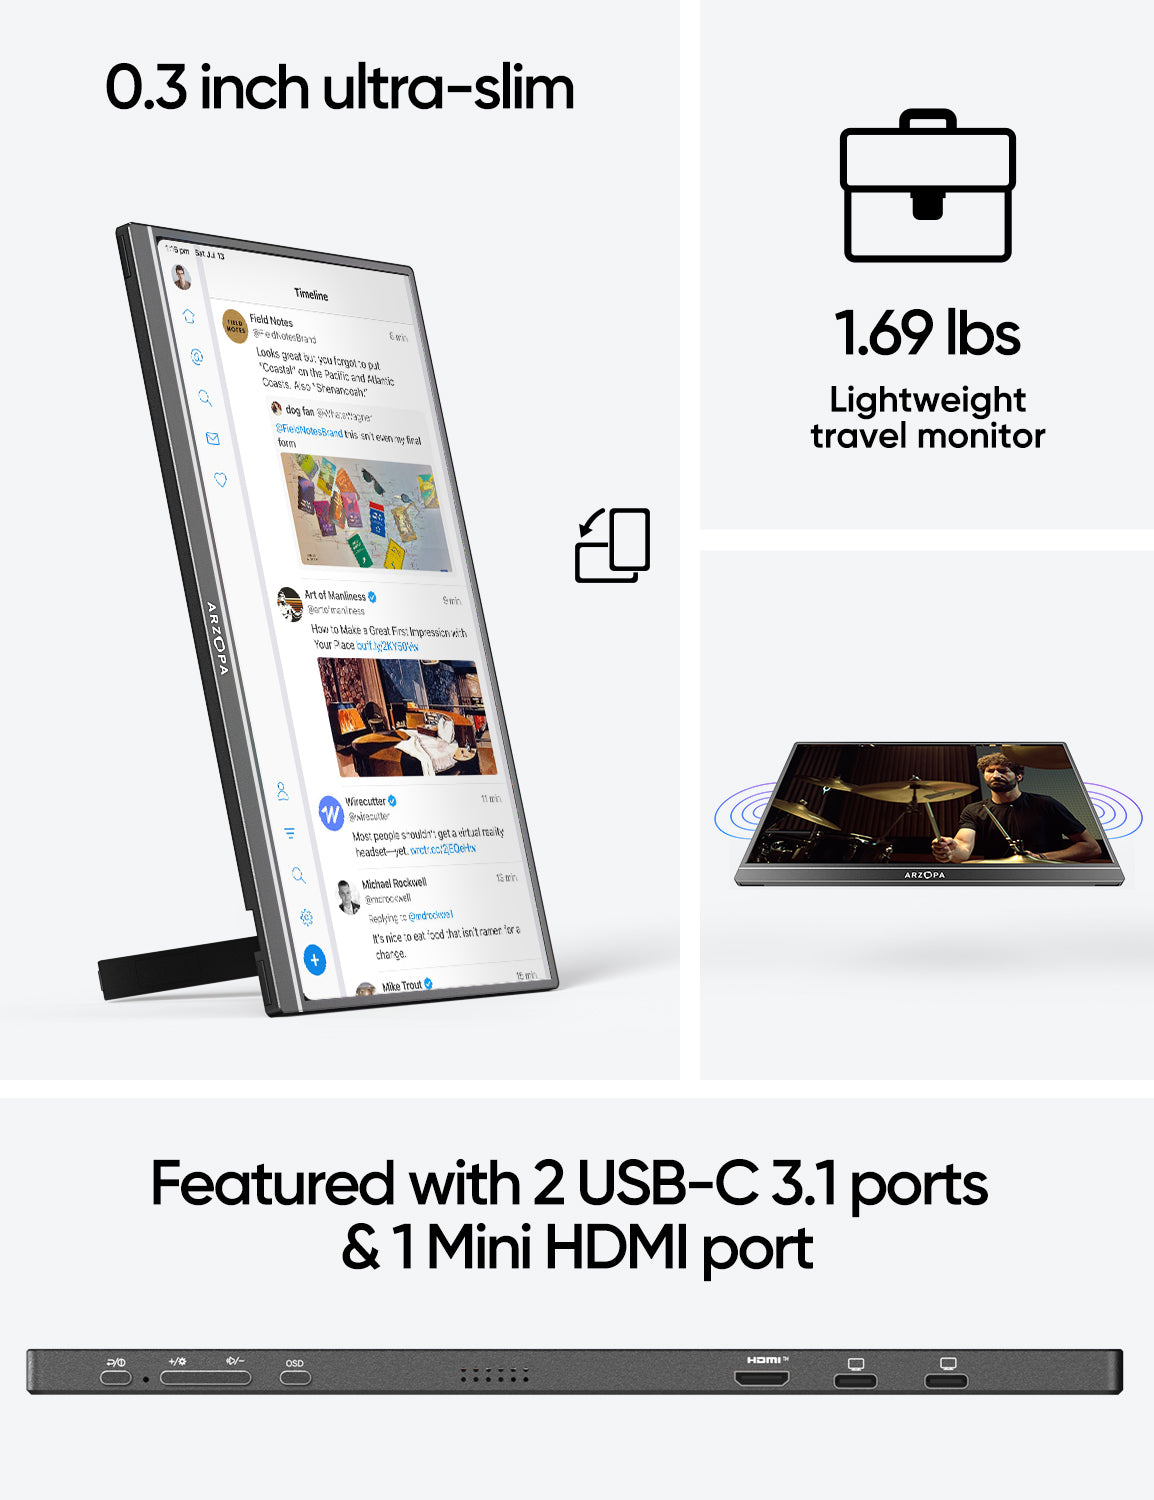 Arzopa 15.6 inch IPS FHD HDR 1080P Resolution 100% SRGB 300 Nits Portable  Monitor - XElectron